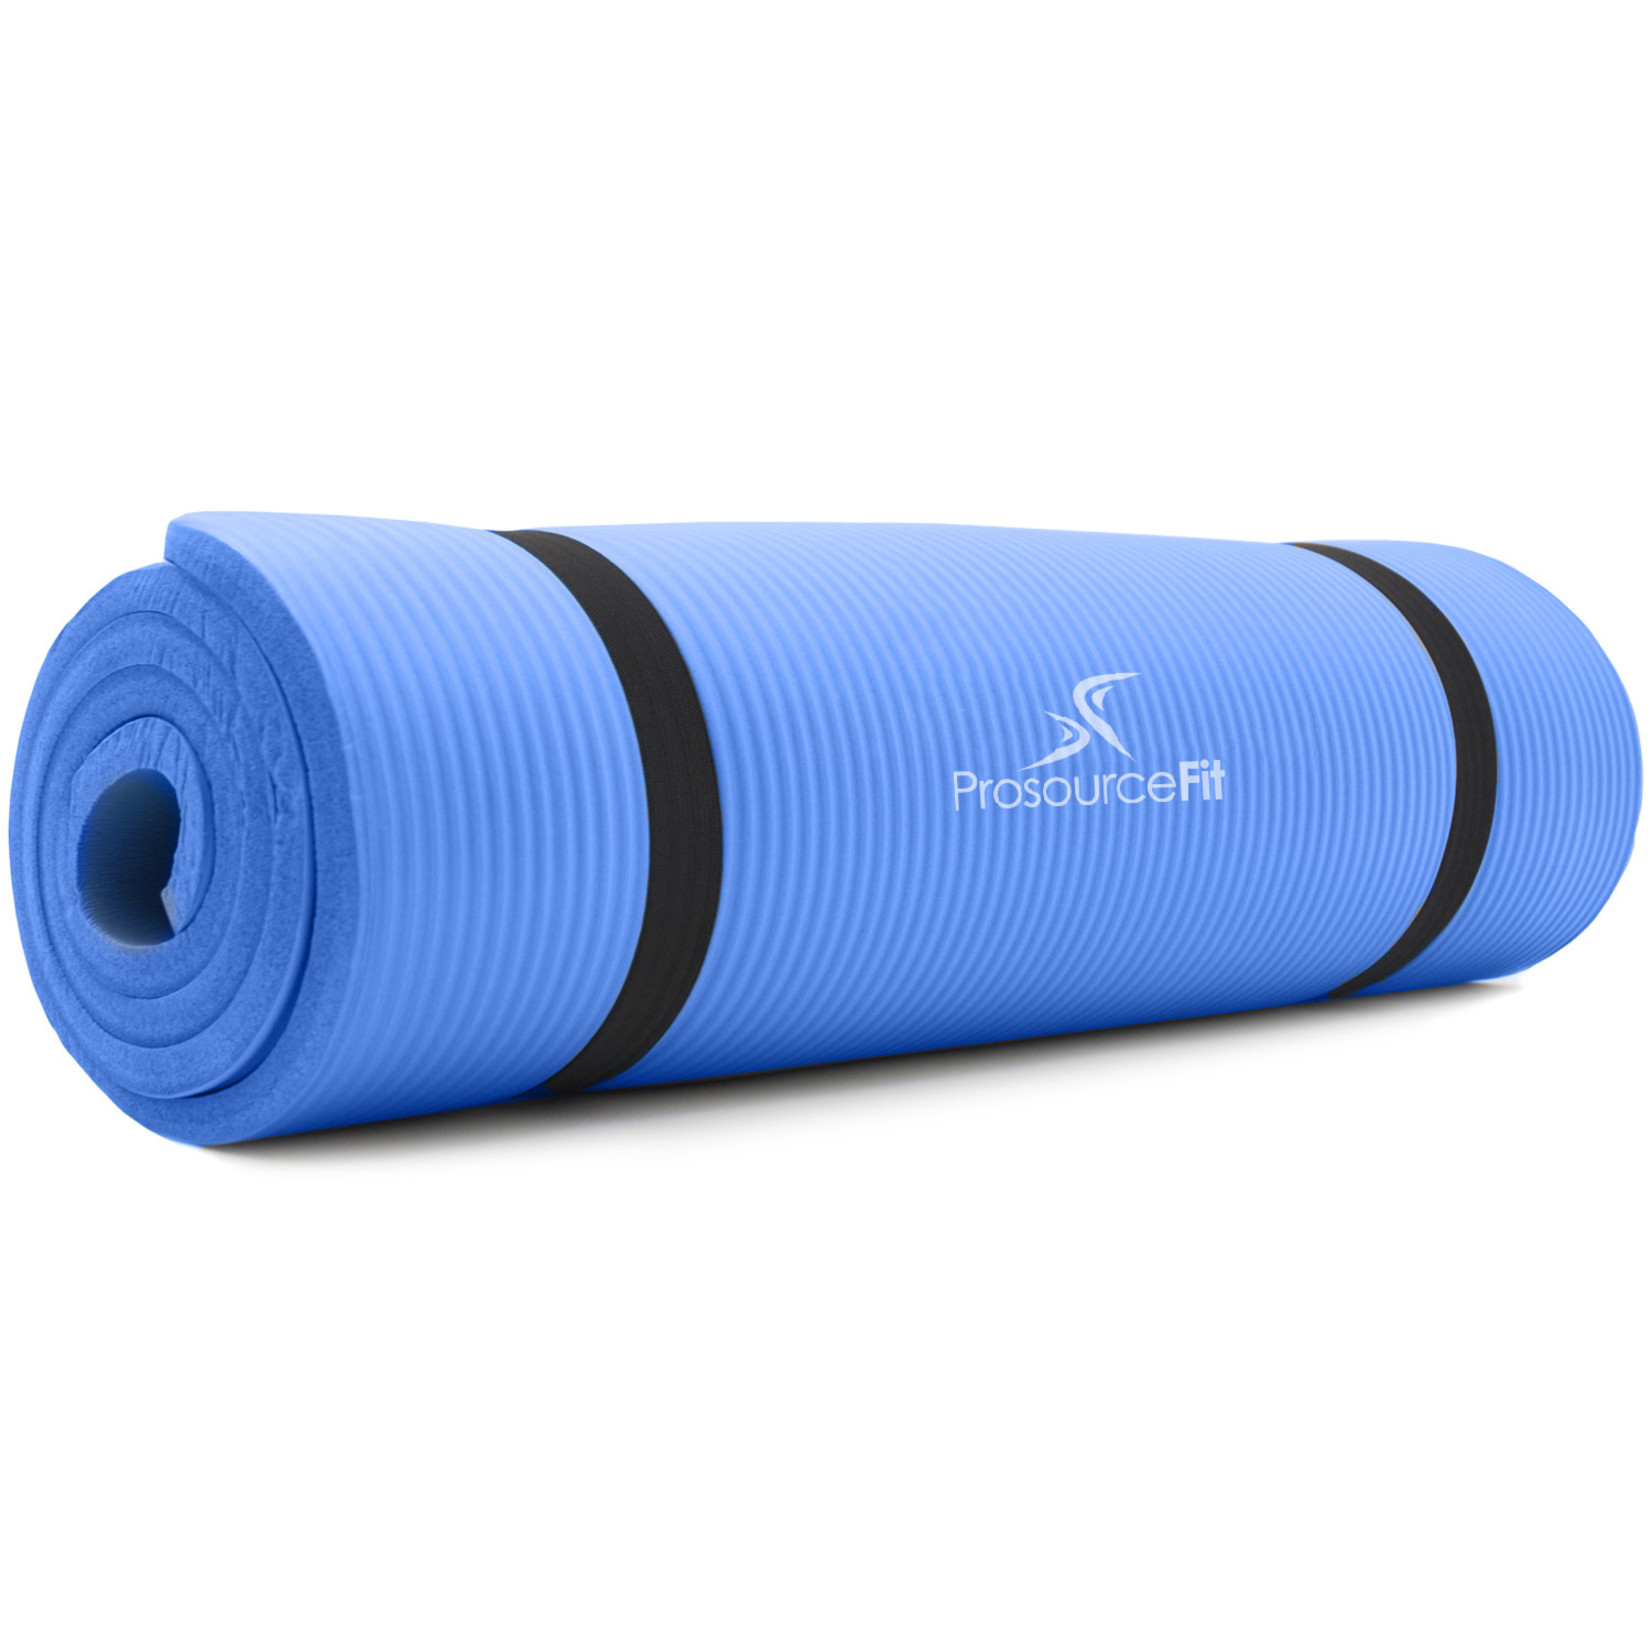 Prosource Fit Yoga And Pilates Mat- Extra Thick- 1/2 Inch- Blue